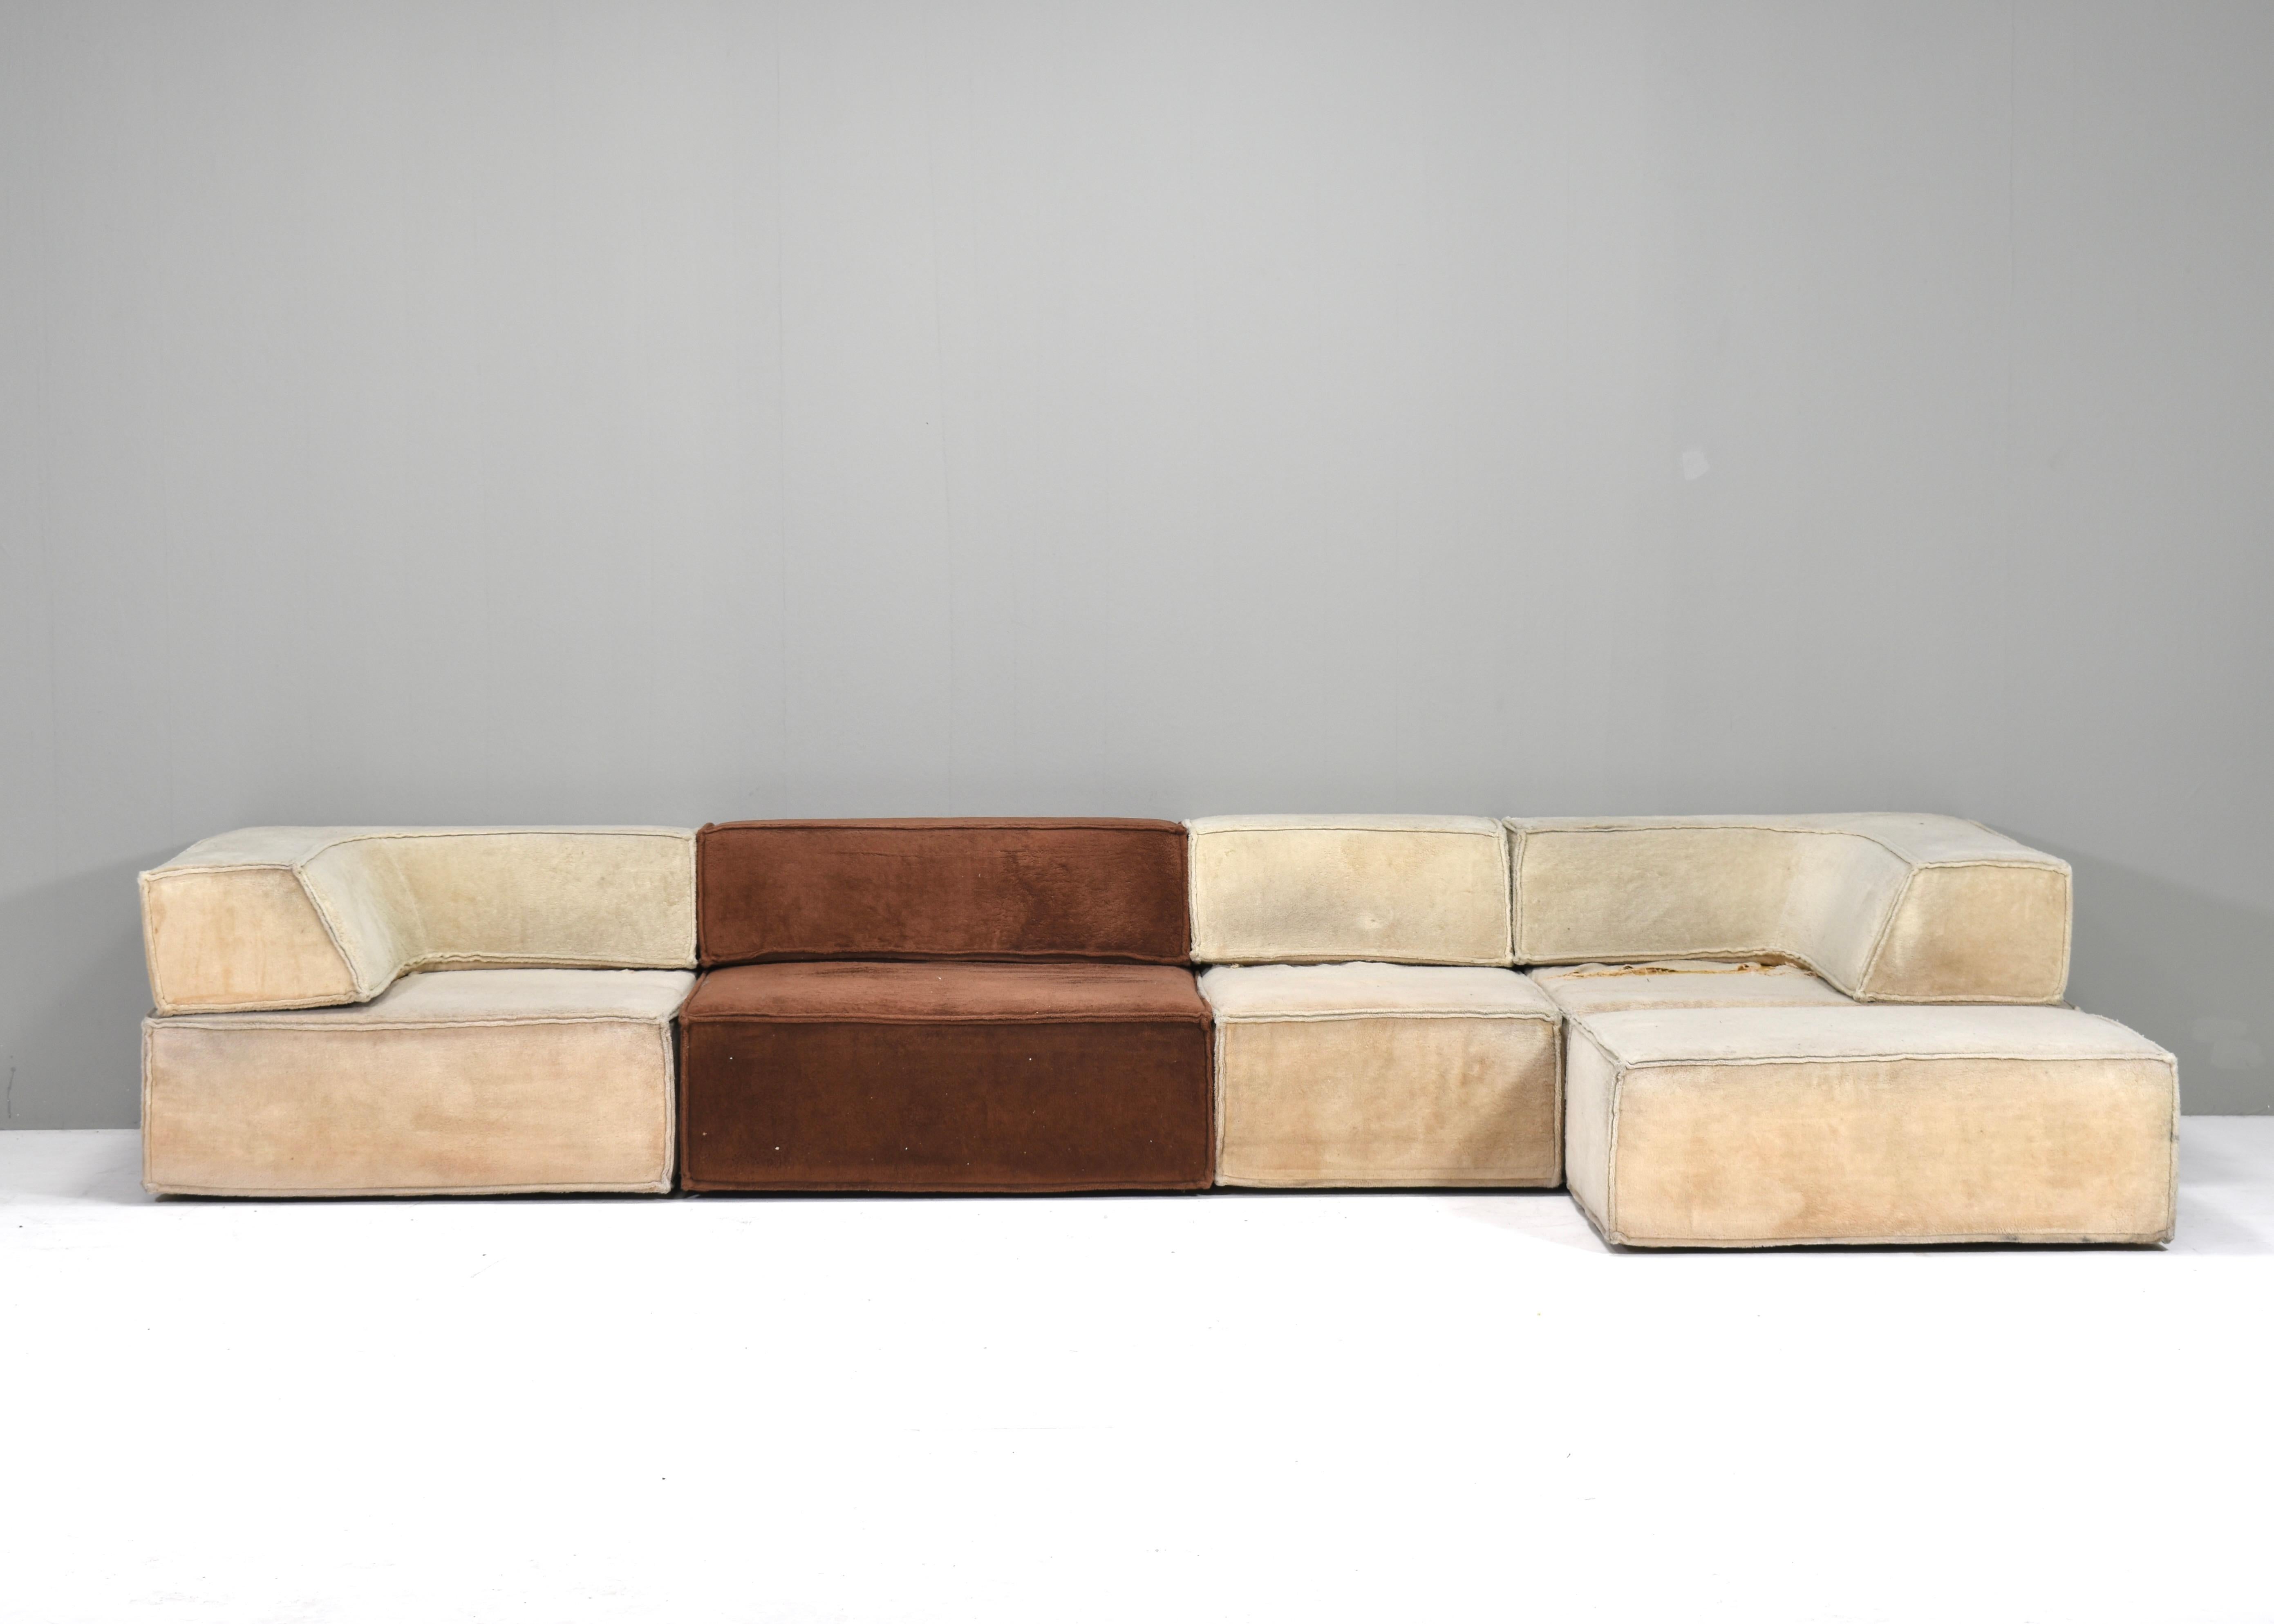 Sectional landscape sofa designed by the Swiss Designers Group named Form AG and produced in the 1970s by COR, Germany.
NEEDS TO BE REUPHOLSTERED. Ask us about the possibilities.
The price excludes reupholstery and fabric

Many different kinds of